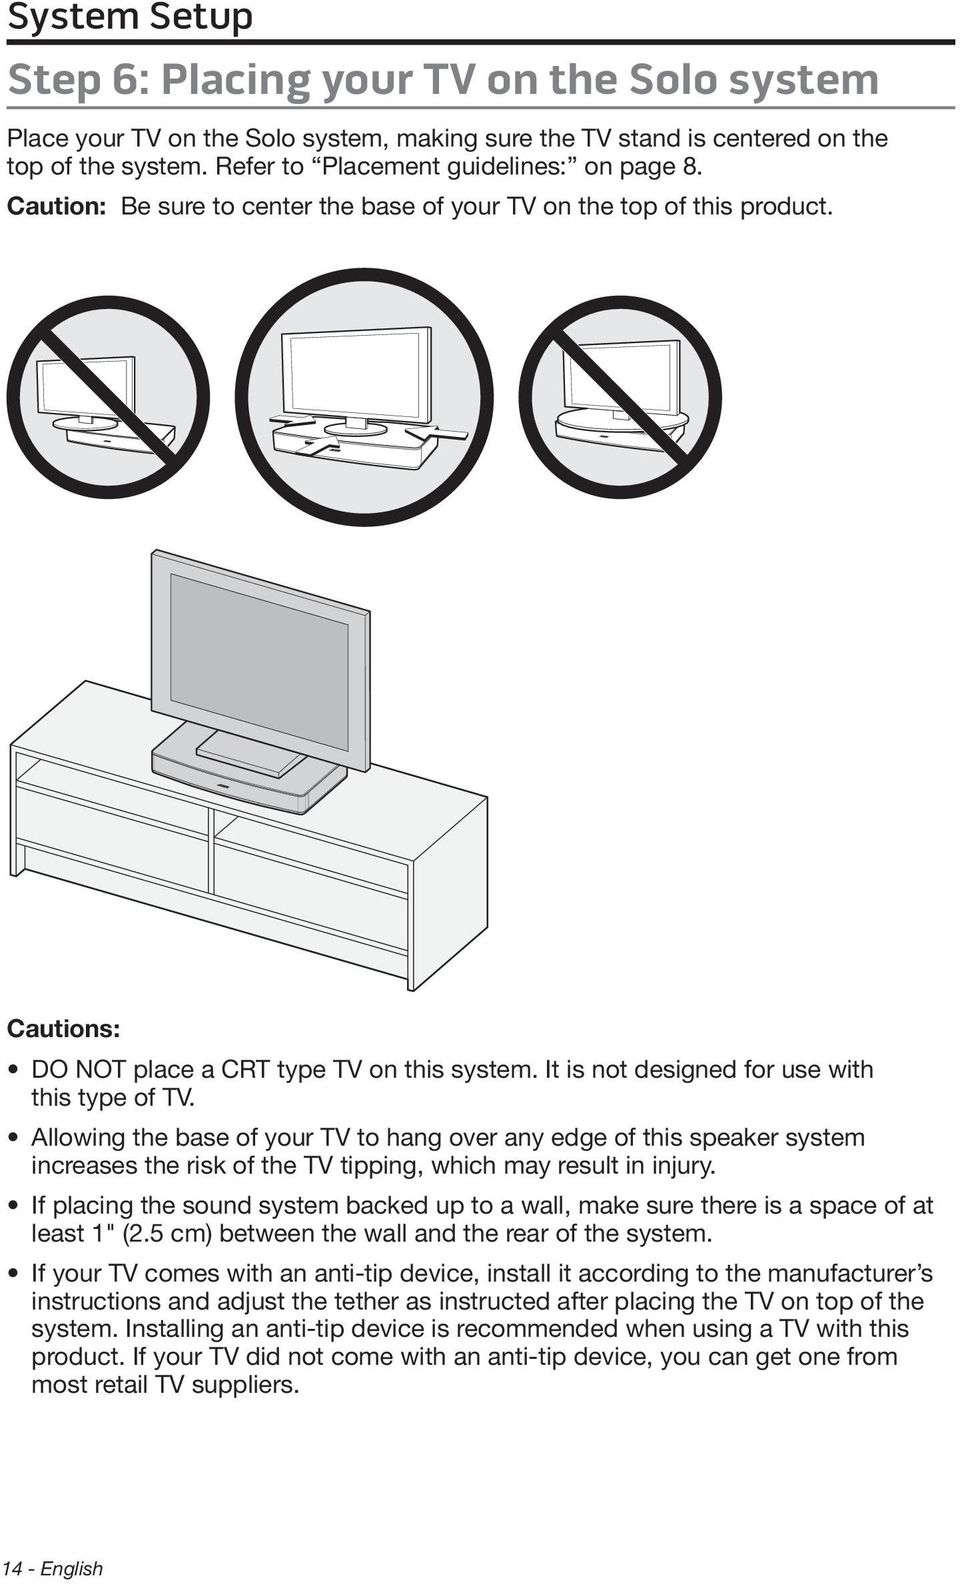 Allowing the base of your TV to hang over any edge of this speaker system increases the risk of the TV tipping, which may result in injury.